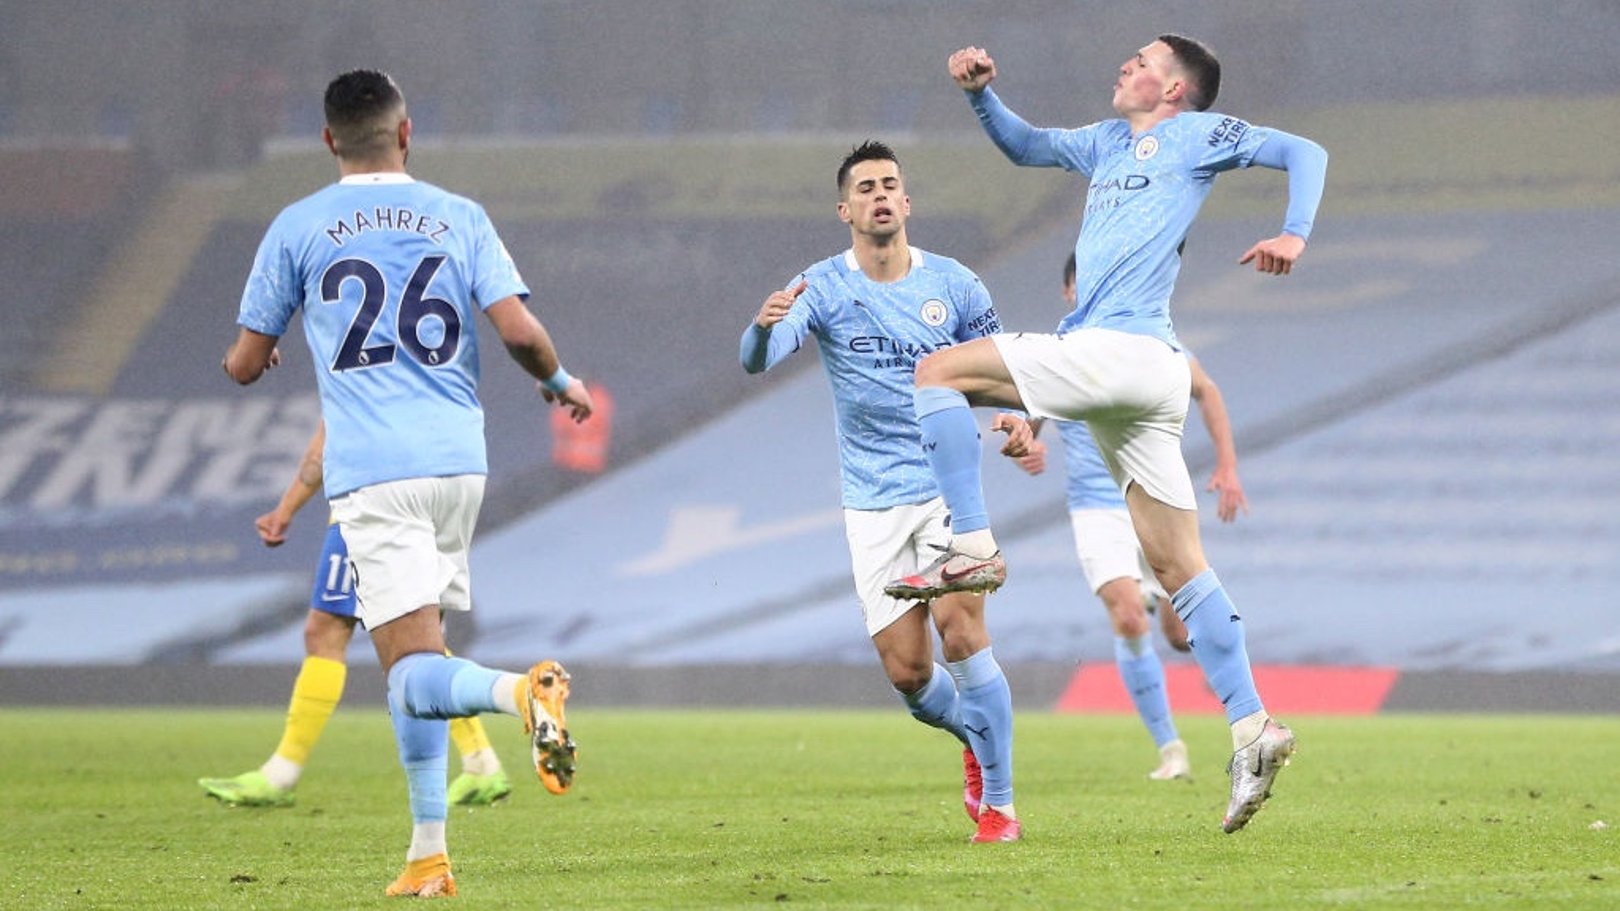 Foden: I want to keep scoring goals